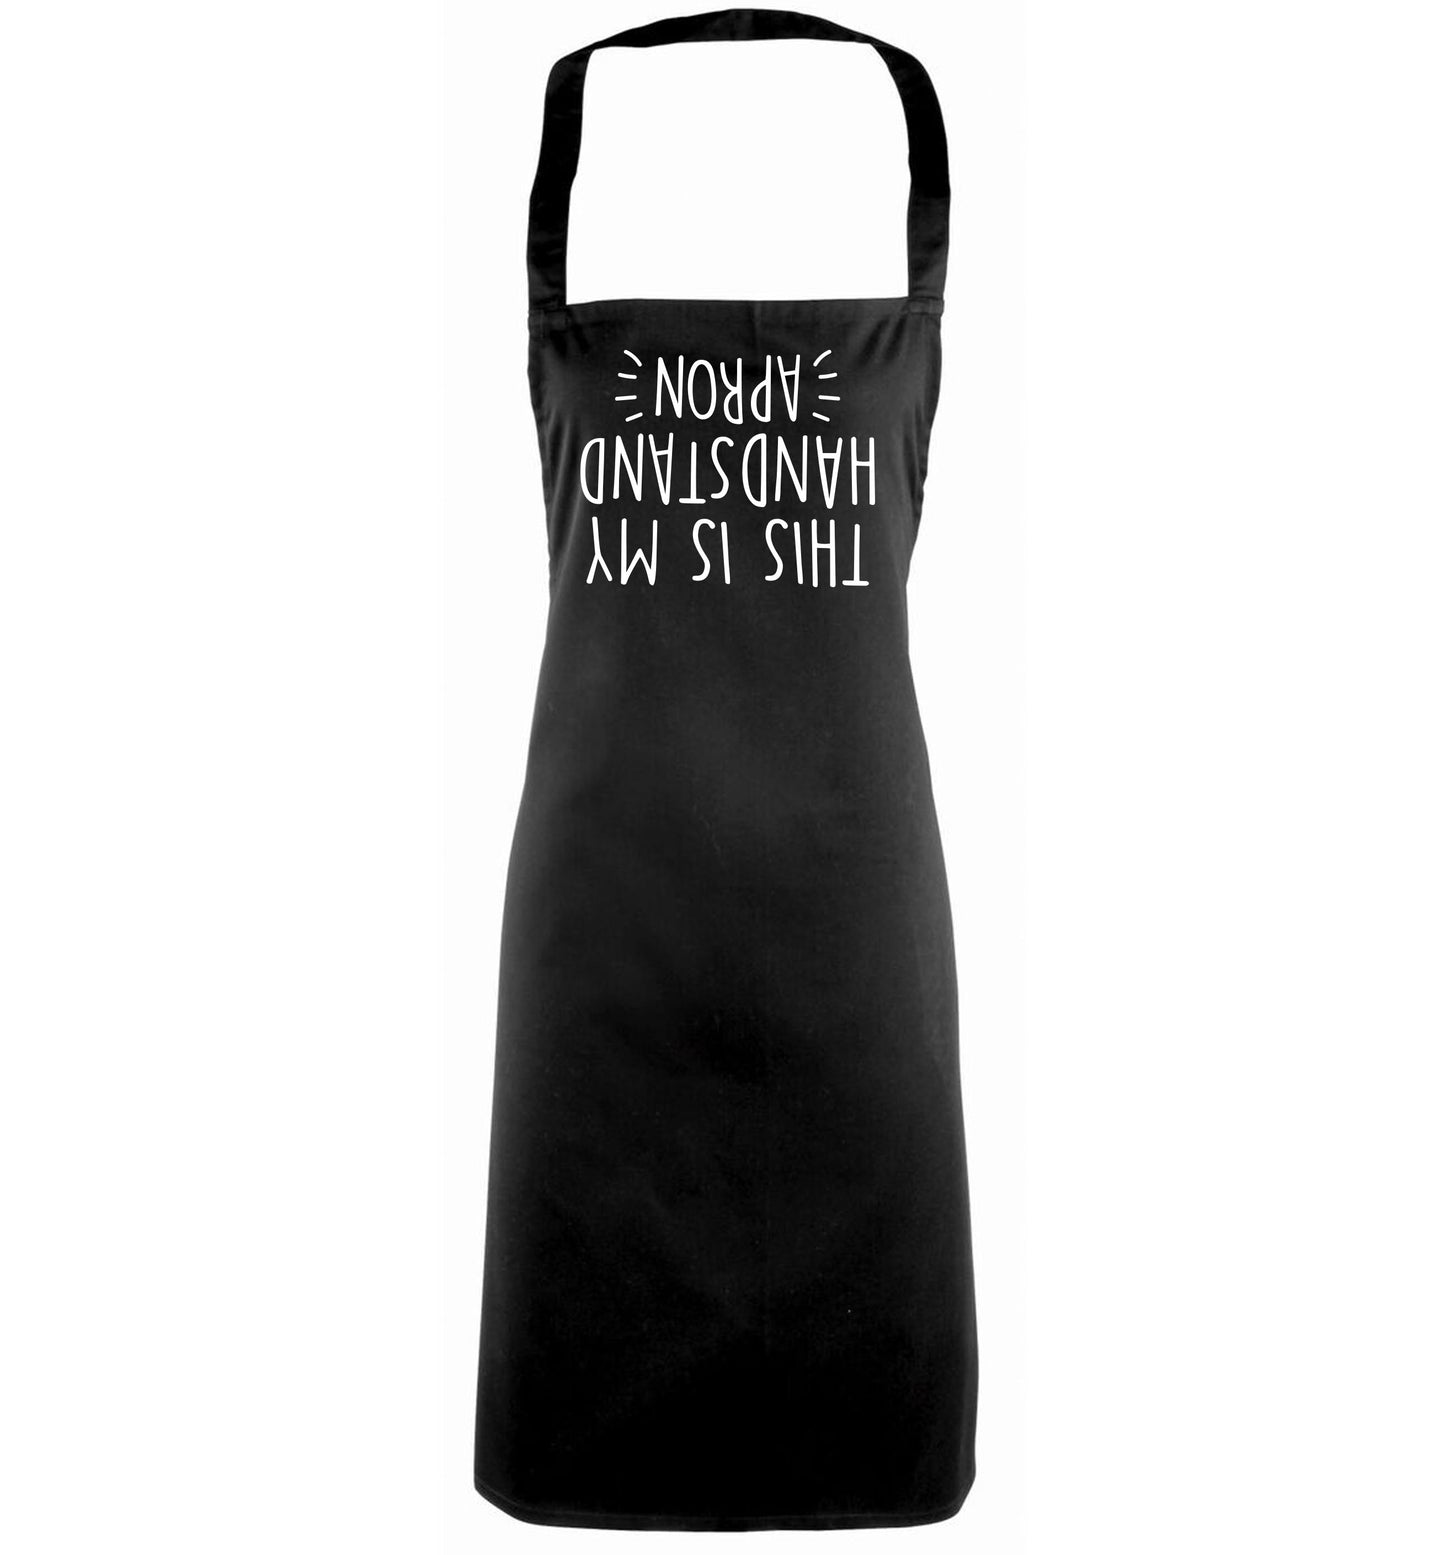 This is my handstand black apron